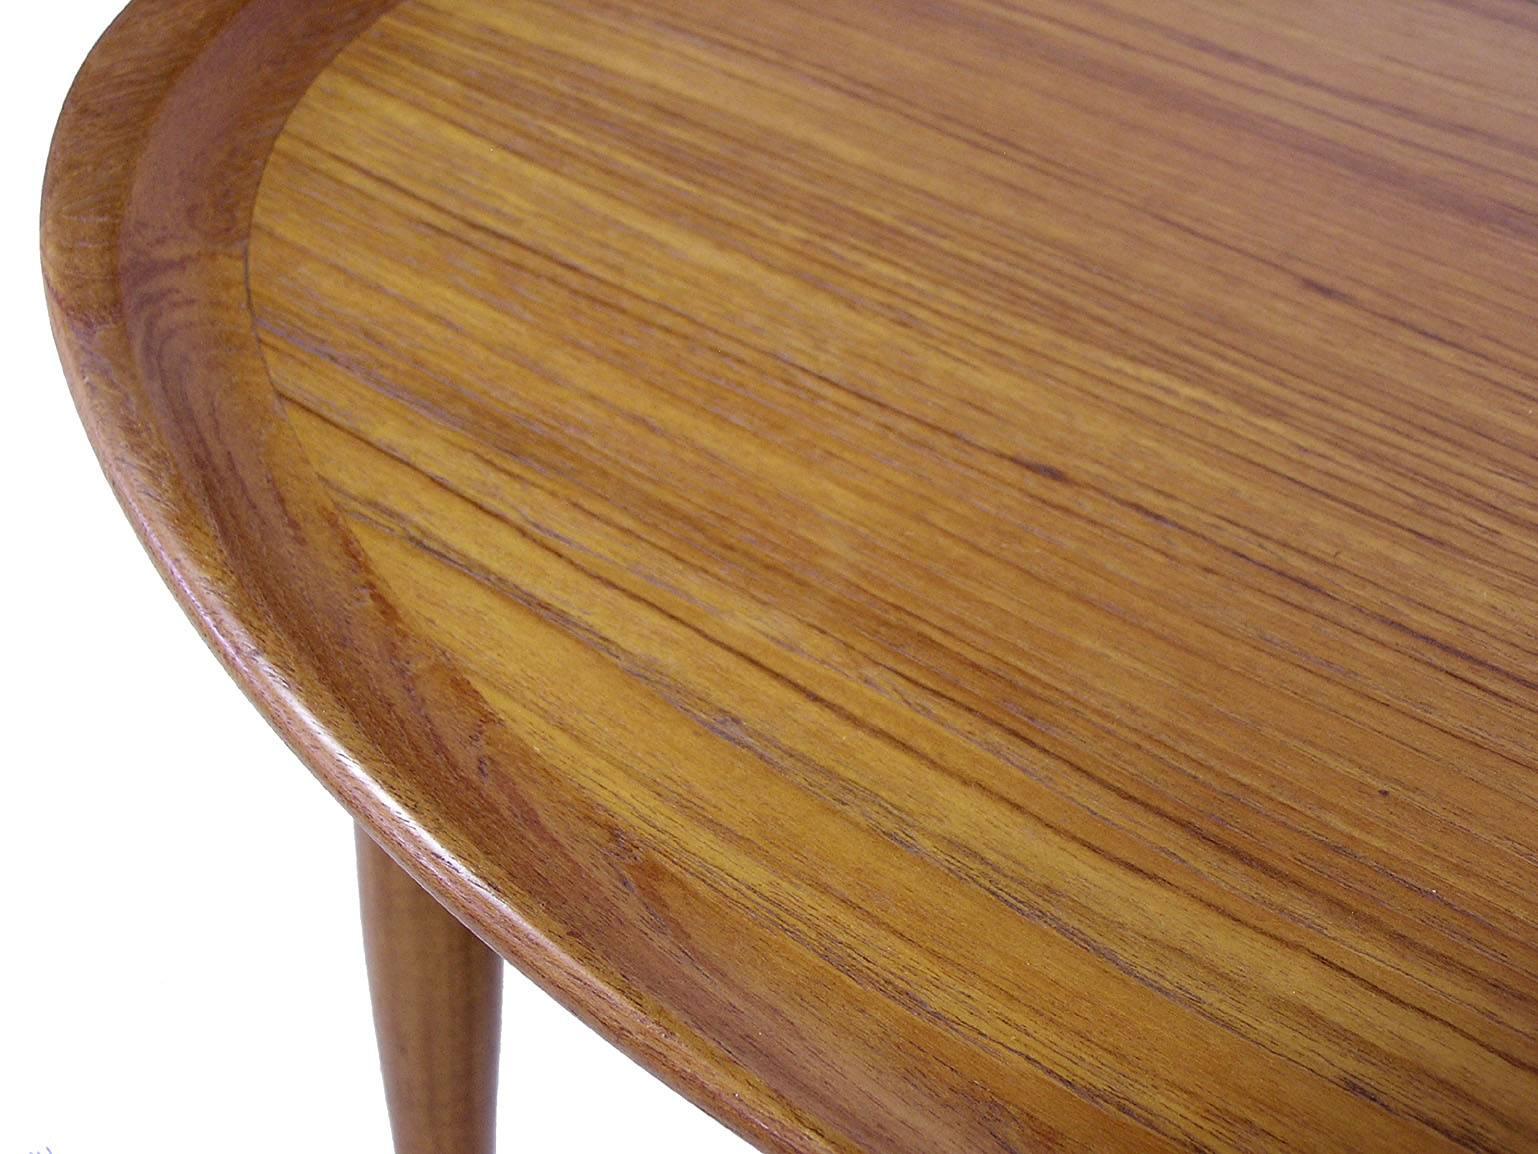 1960s Oval Teak Occasional or Side Table, Denmark In Excellent Condition For Sale In Winnipeg, Manitoba